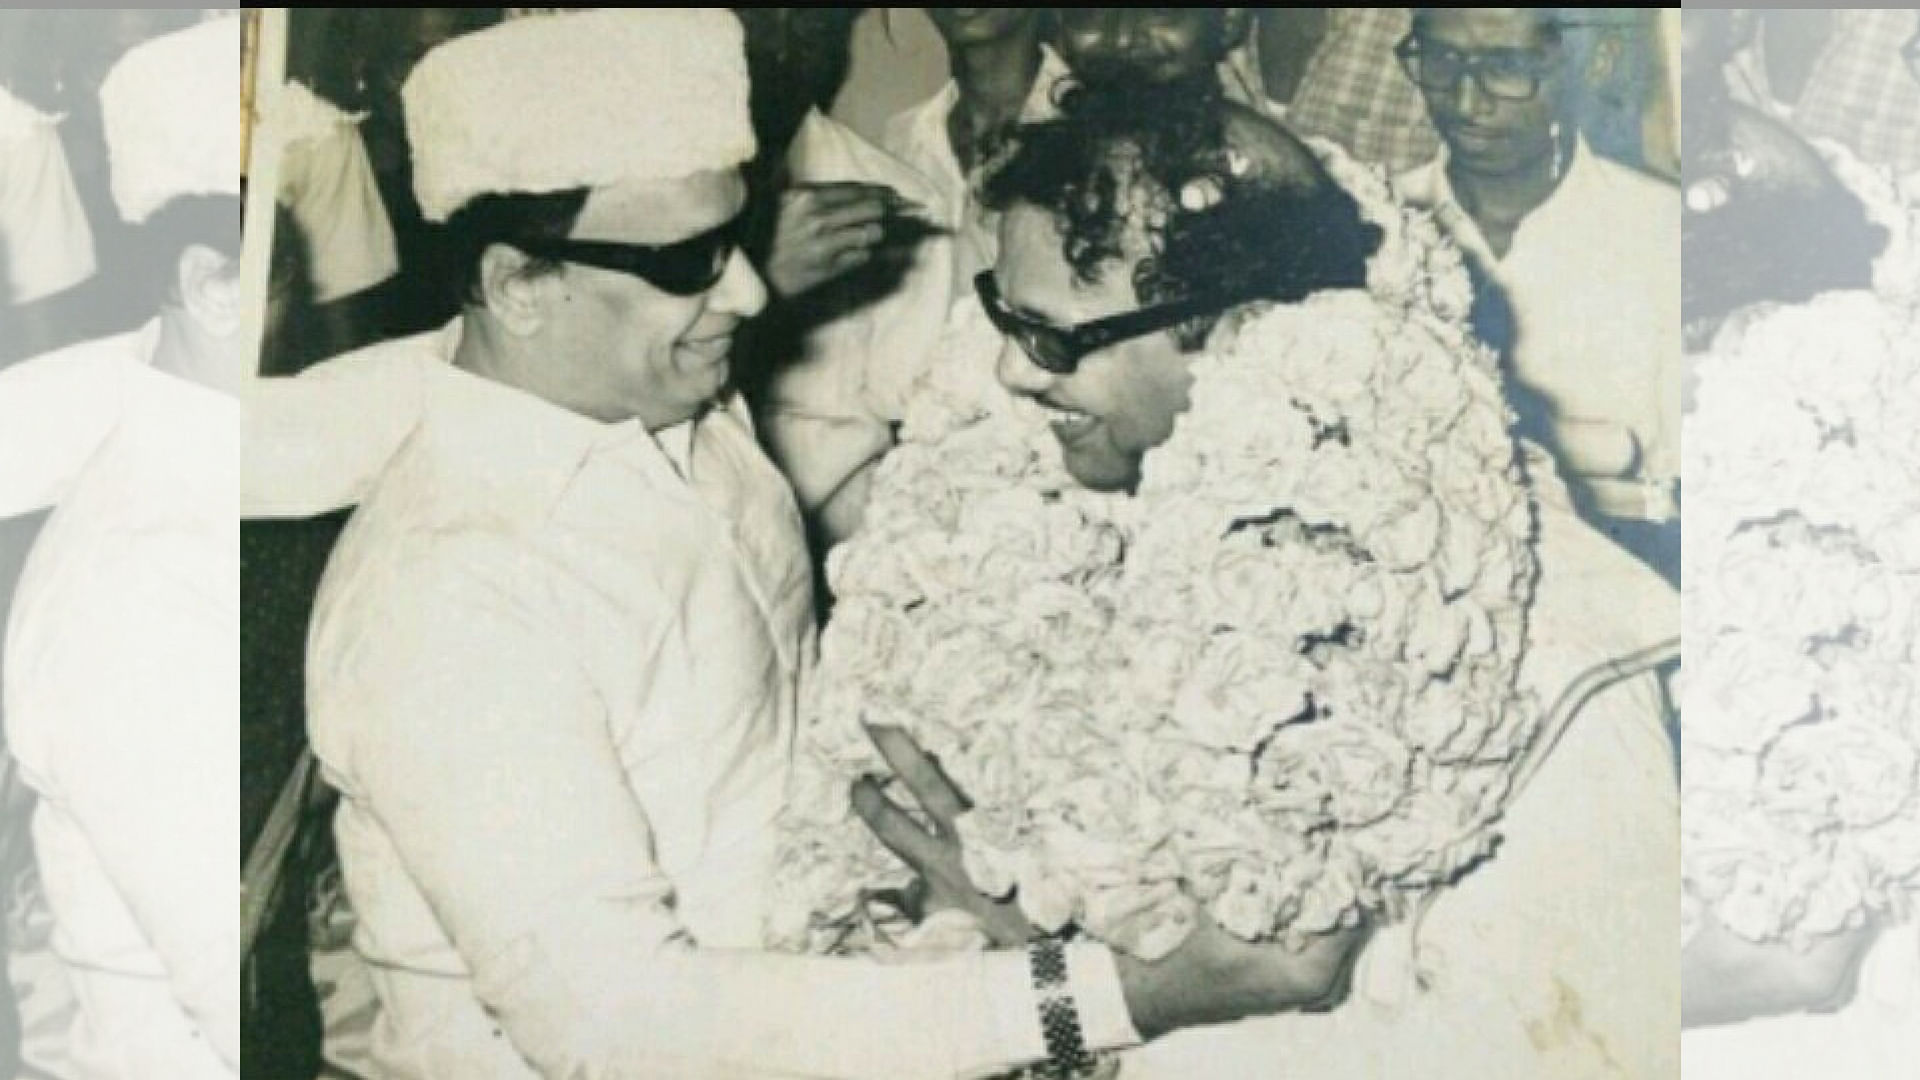 MGR and Karunanidhi, friends in film turned political rivals.